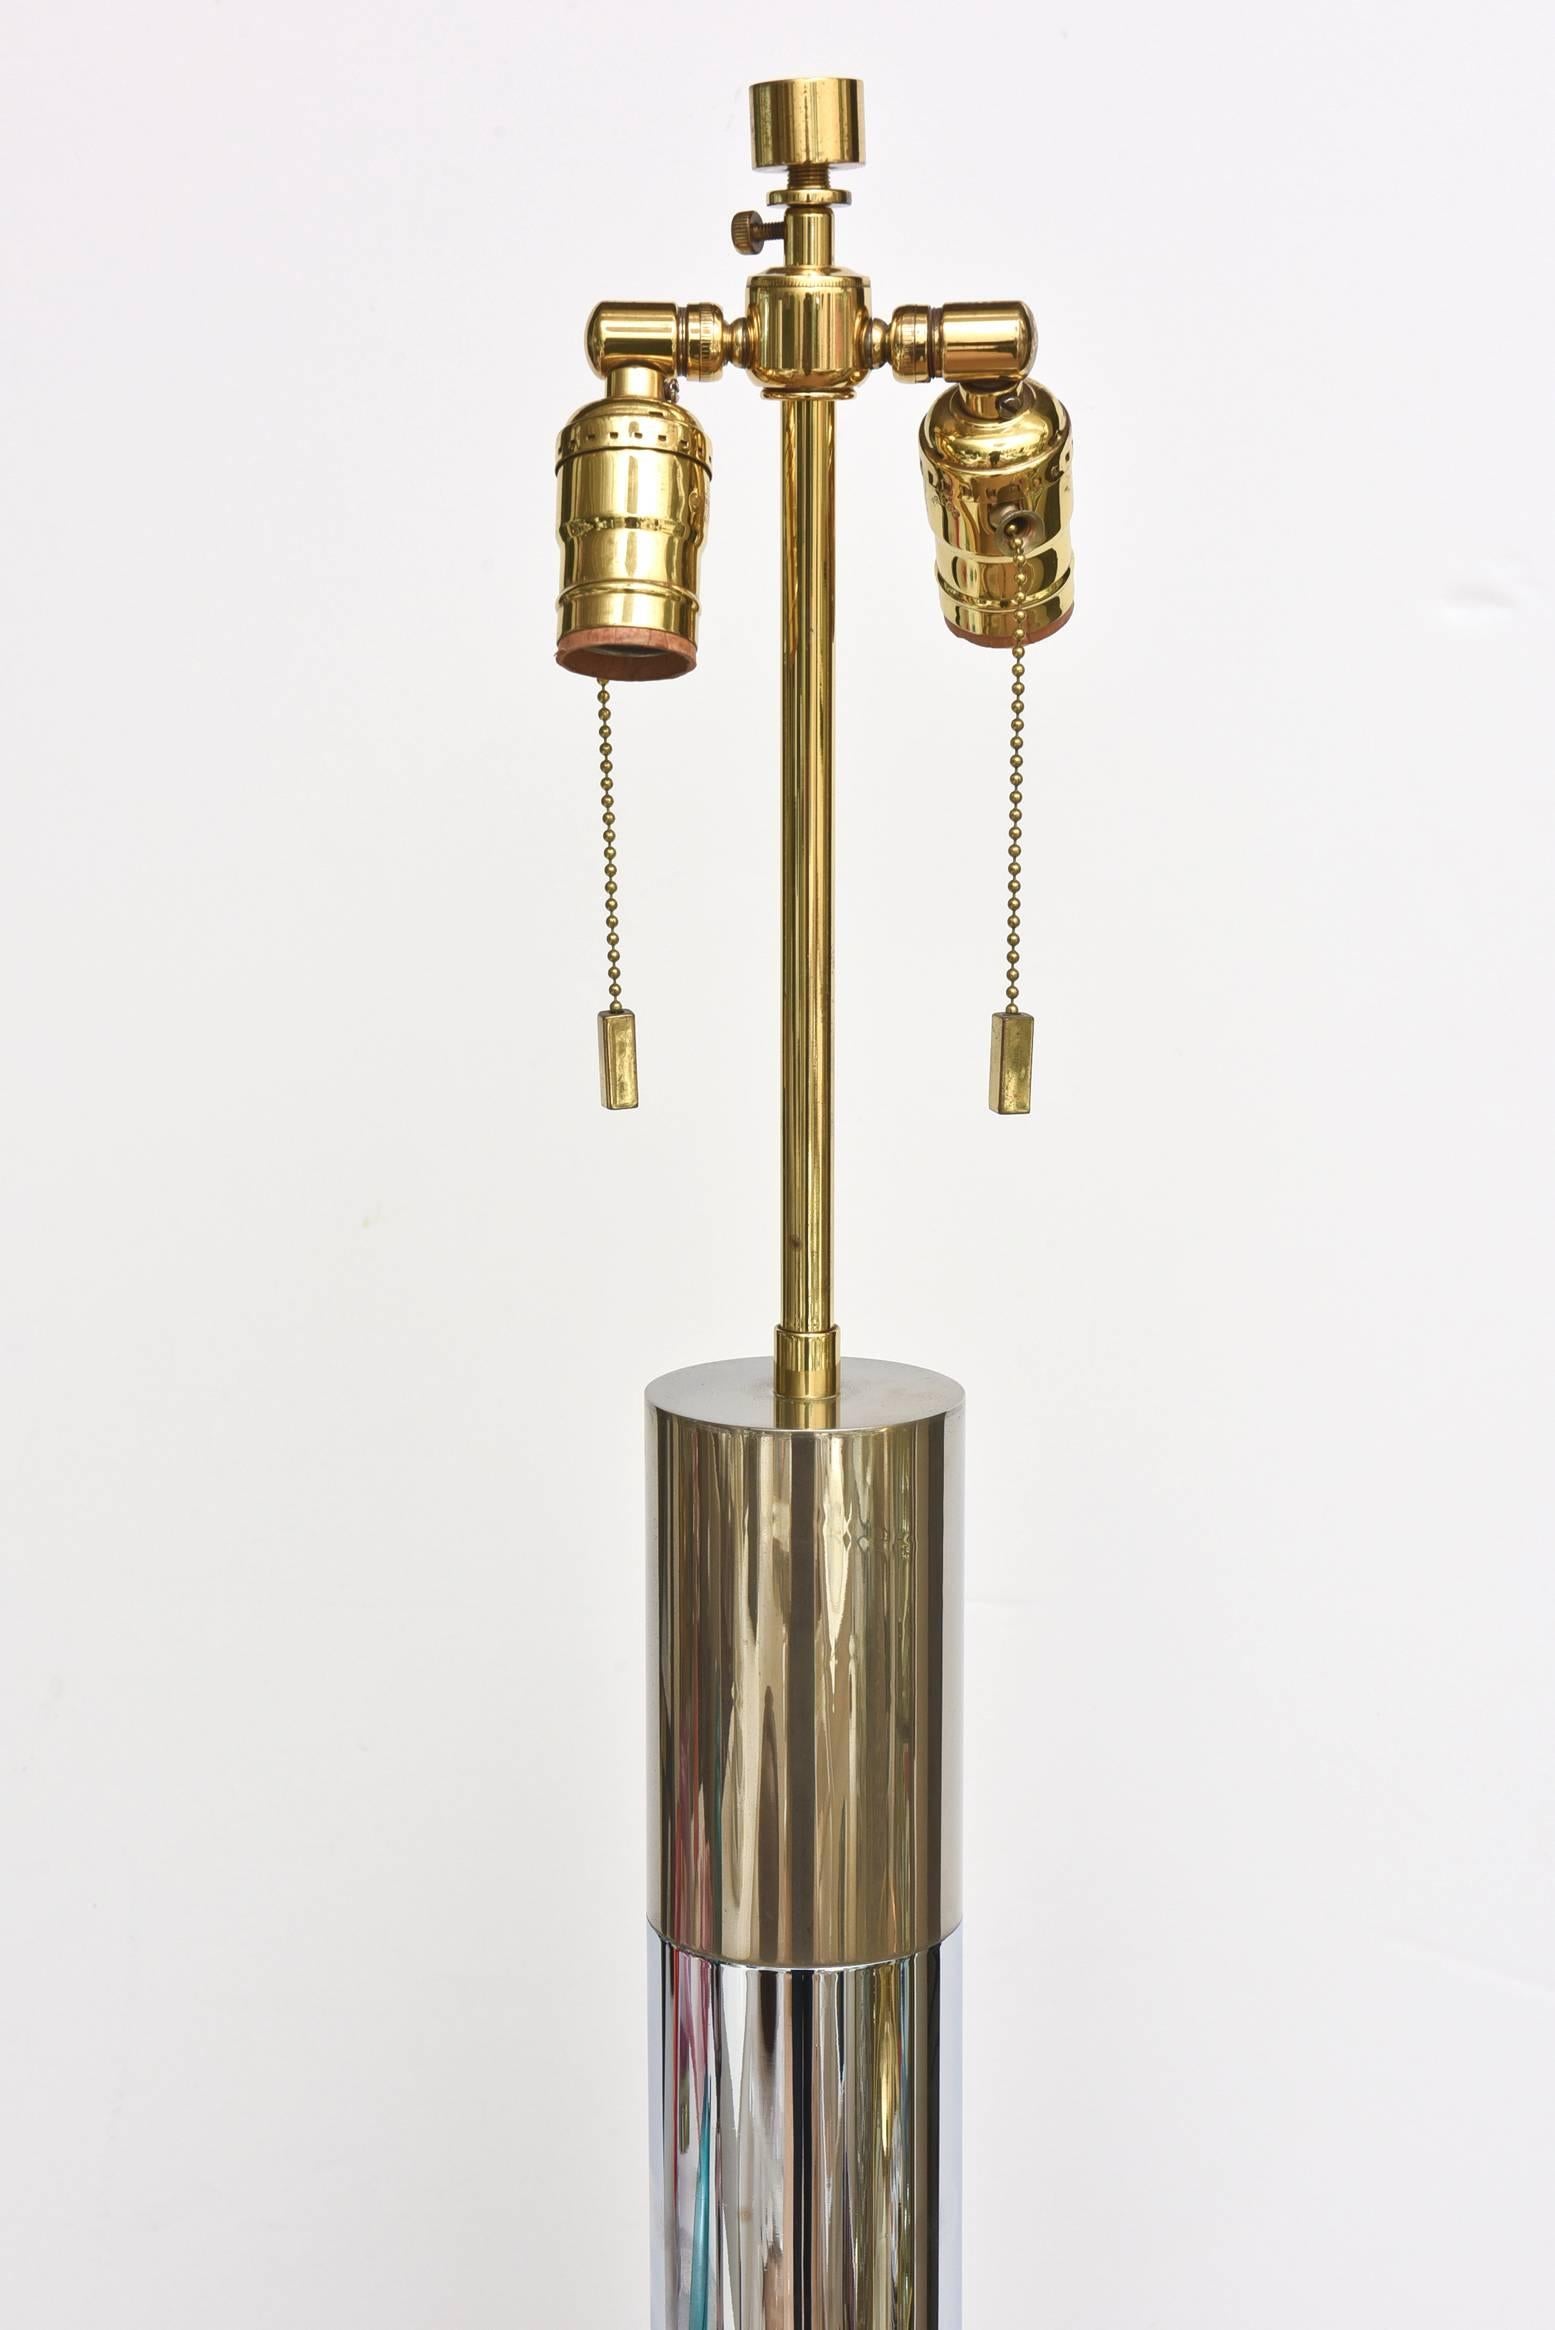 This mint condition Karl Springer floor lamp has the two sockets with pull chains. It has alternating chrome and brass with a 12